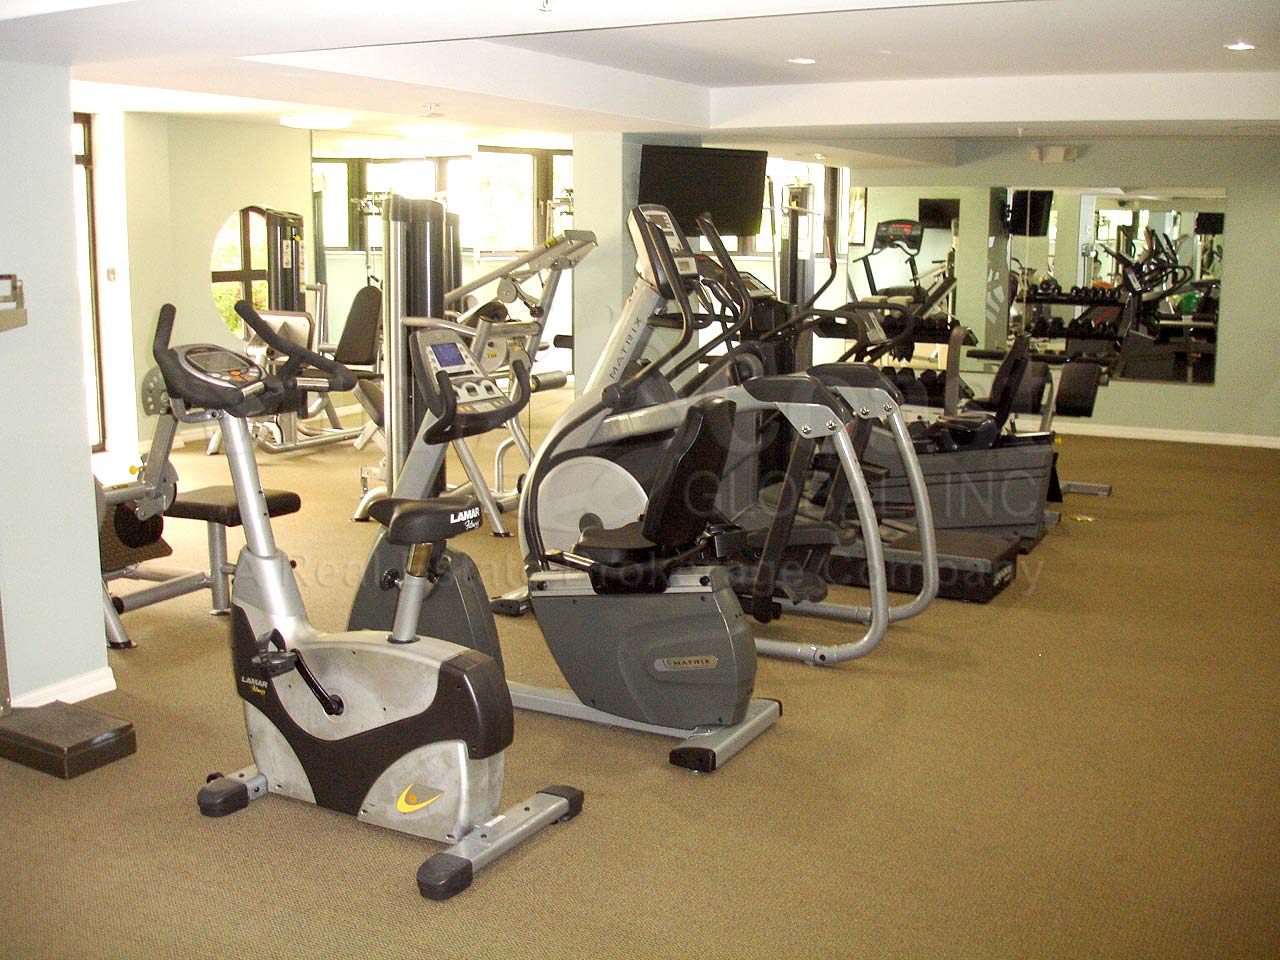 Park Shore Tower Exercise Room